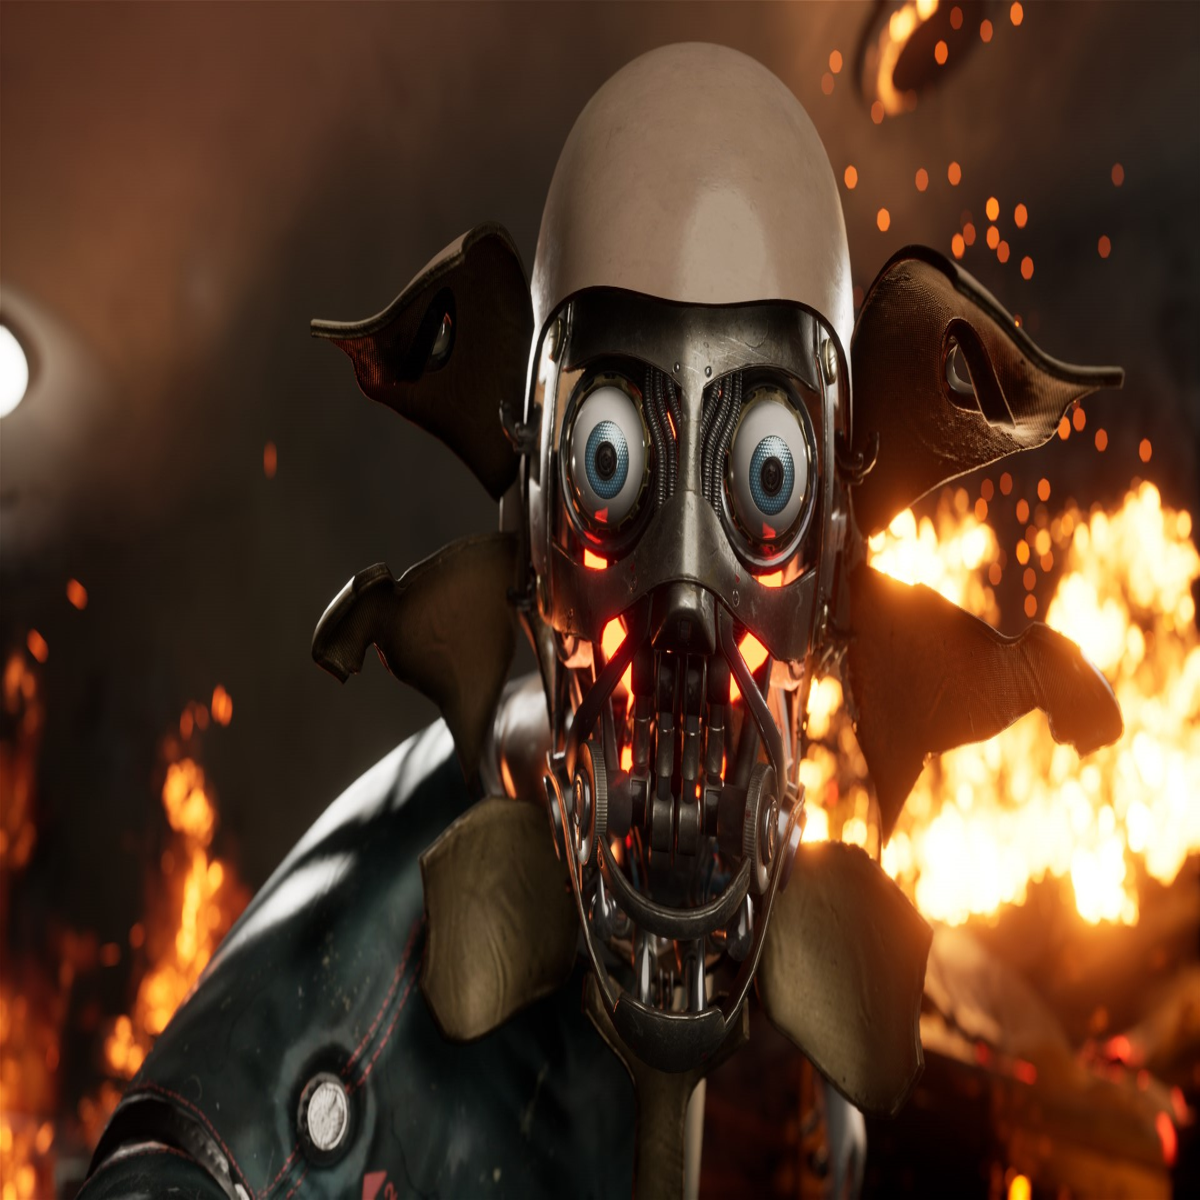 Atomic Heart Reviews Depict A Game That Takes Big Swings, Misses Most Of  Them